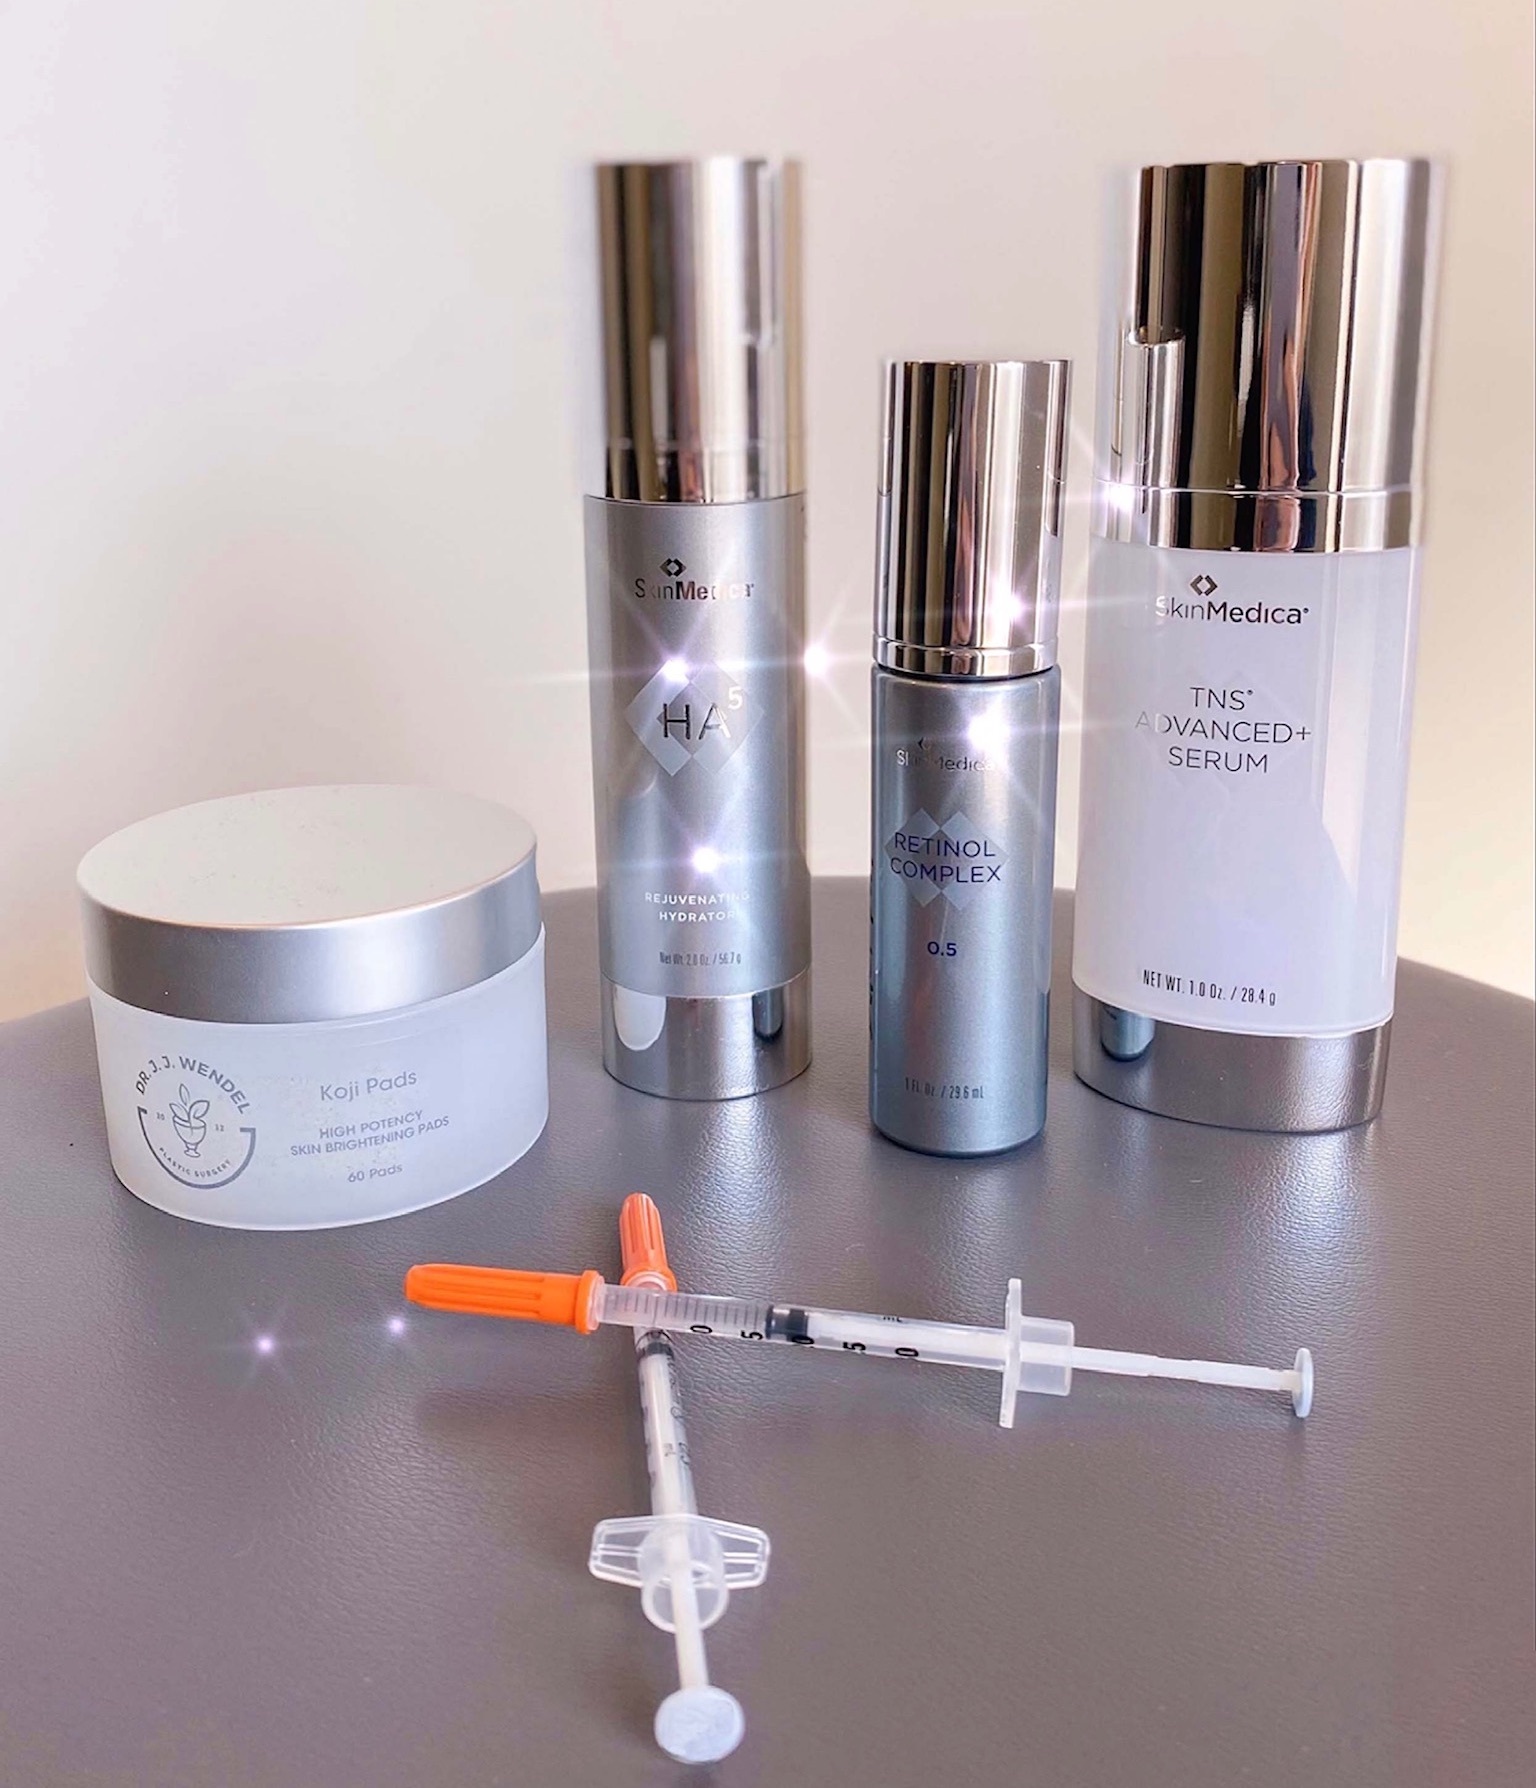 skinmedica and wendel skin care products on table